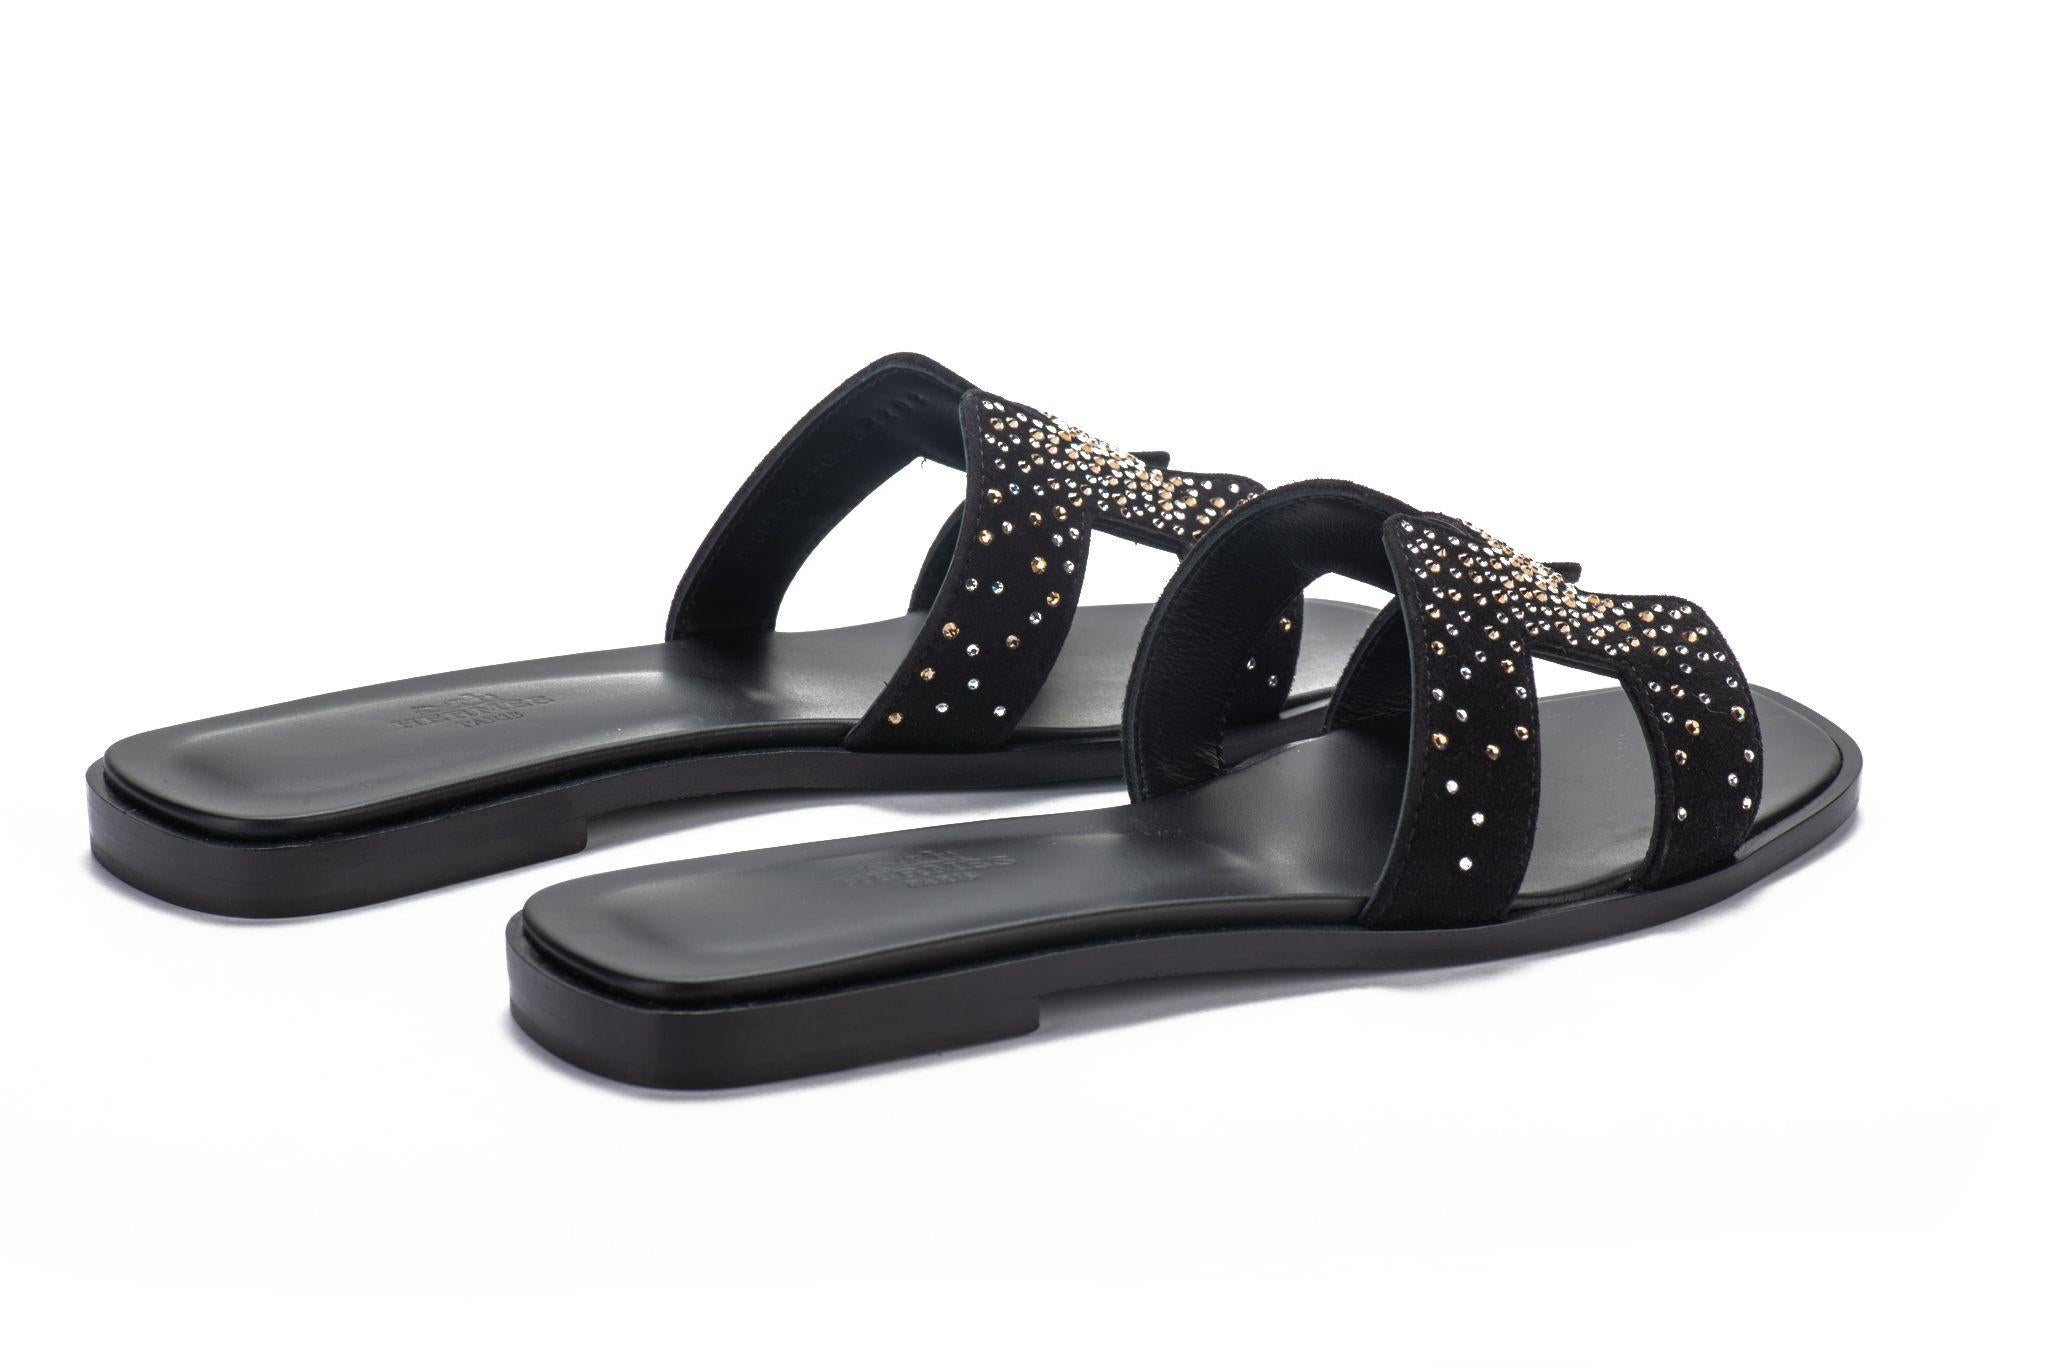 Hermes limited edition black goatskin suede flat sandals with rhinestones H design. Size European N. 38, come with dust cover and original box. Brand new.